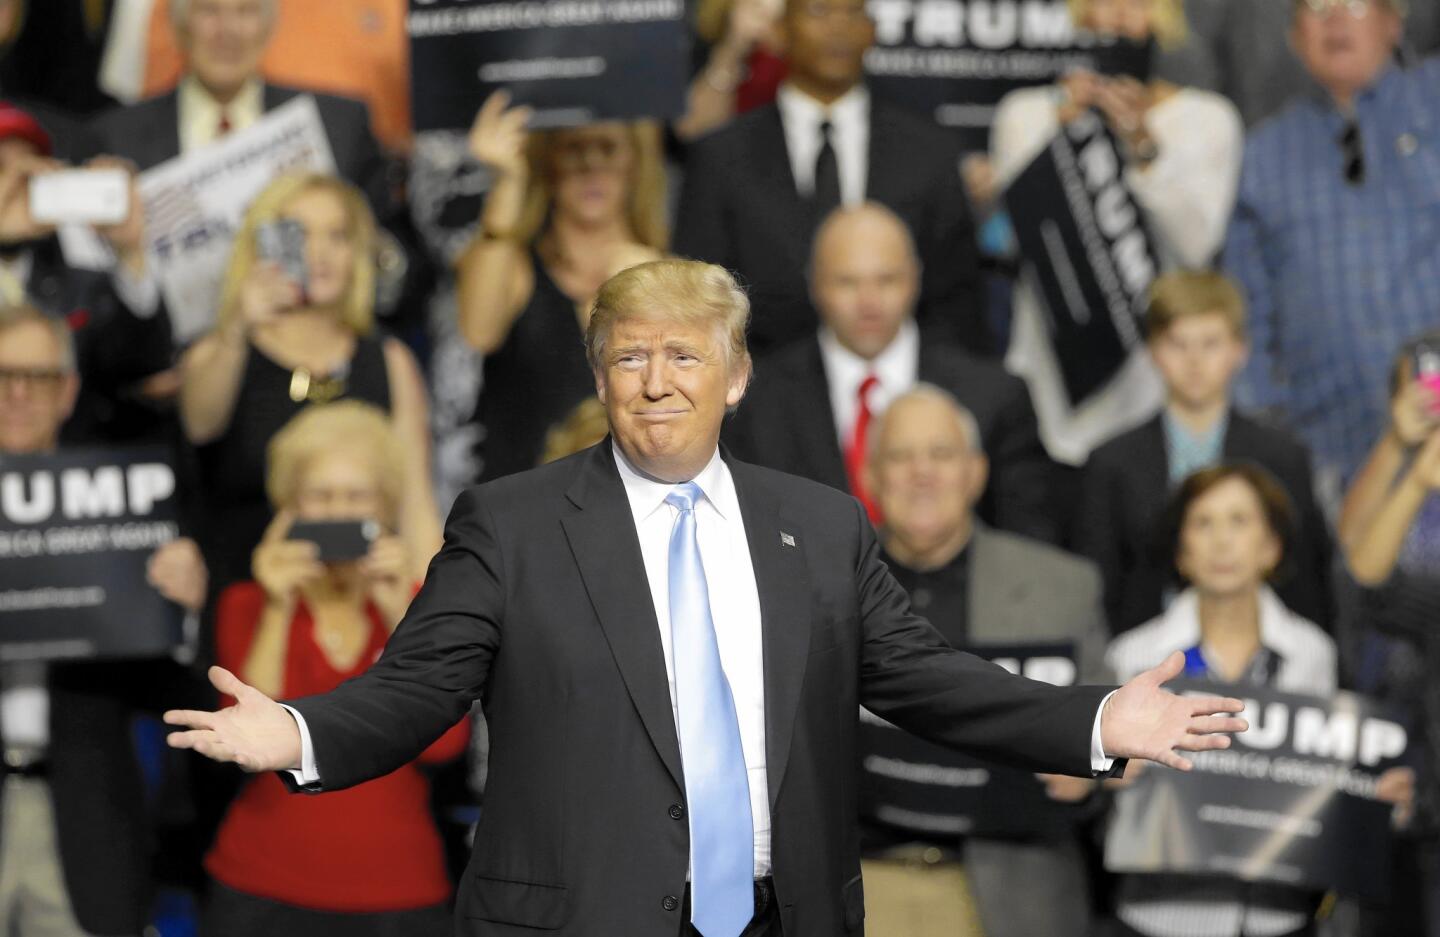 Donald Trump at Fayetteville, N.C., rally where protester was punched